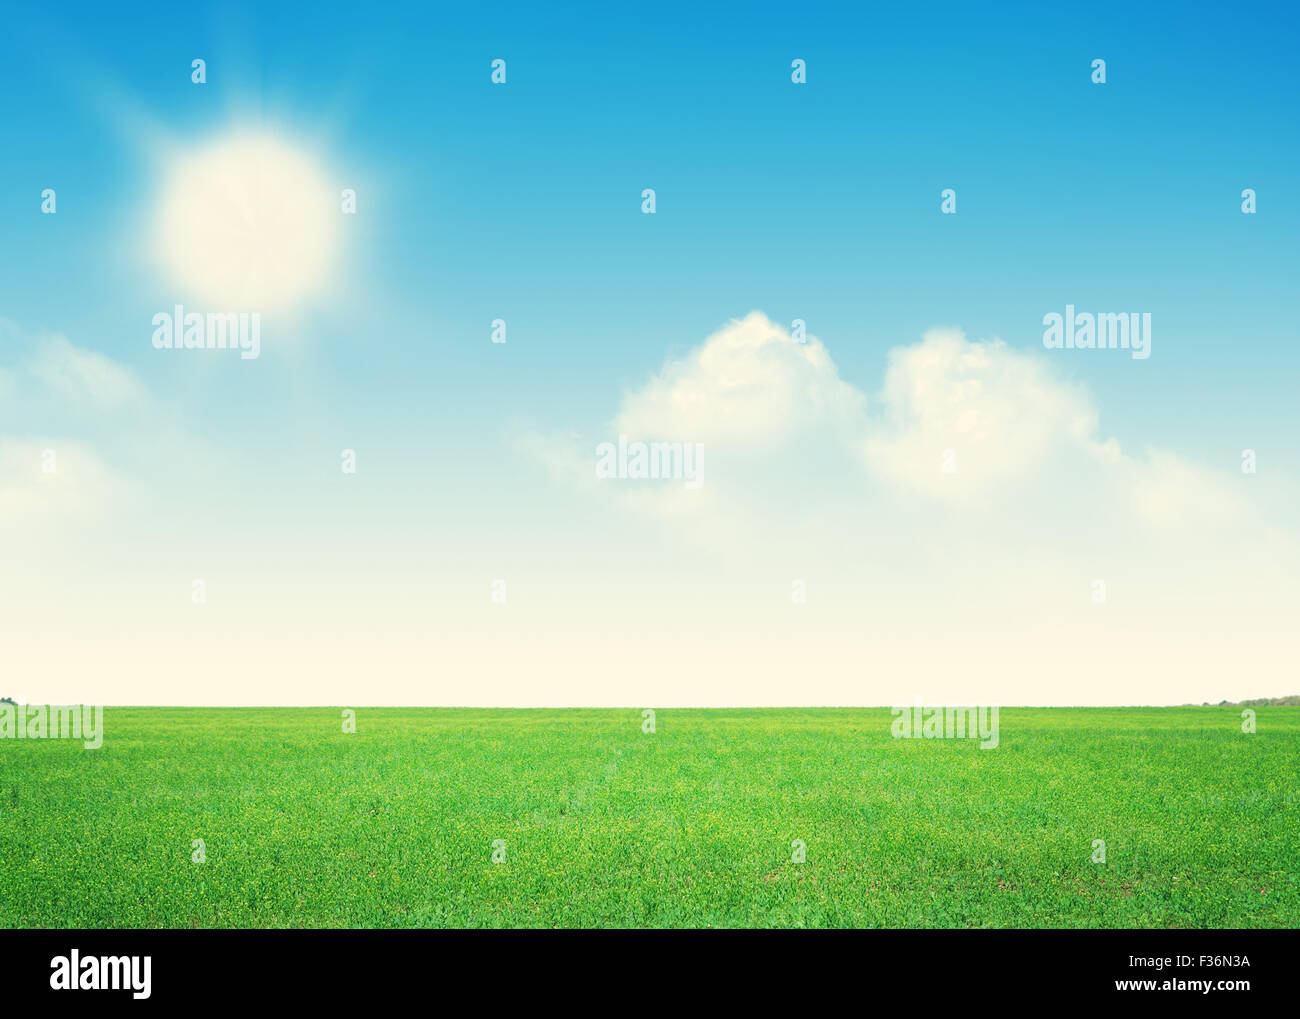 Endless green grass field and blue sky with clouds background Stock ...